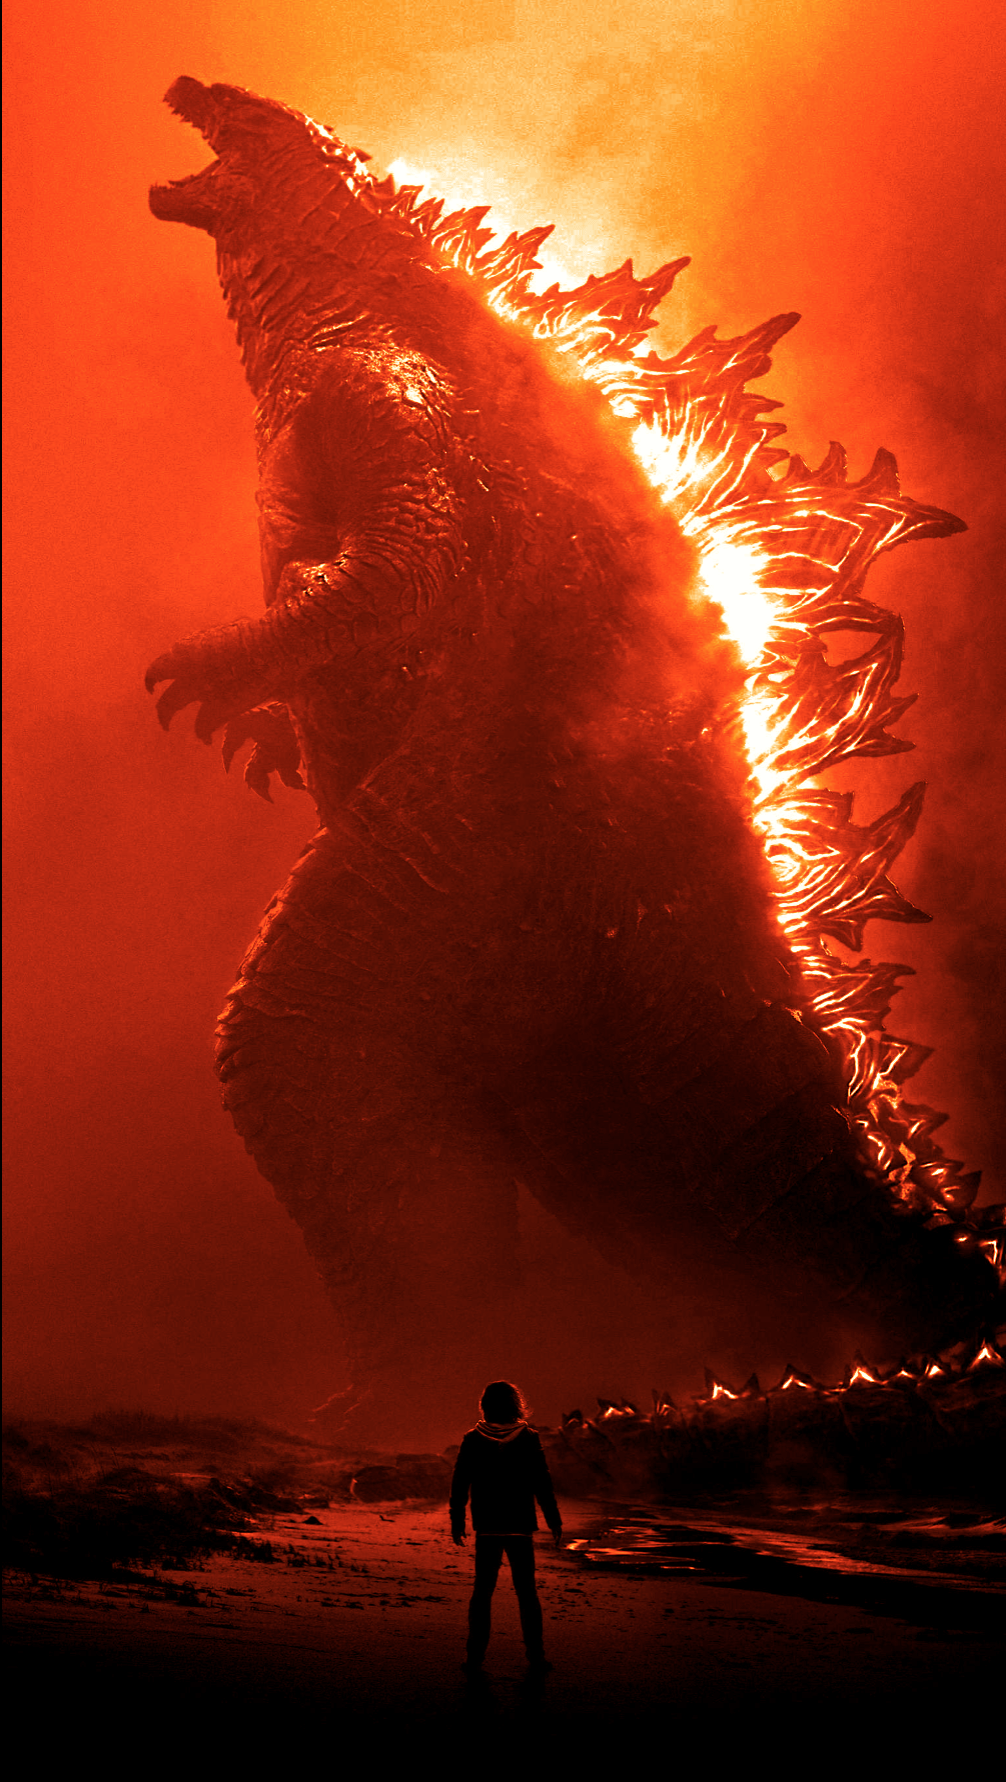 Free Download Godzilla King Of The Monsters 4k Wallpaper Image